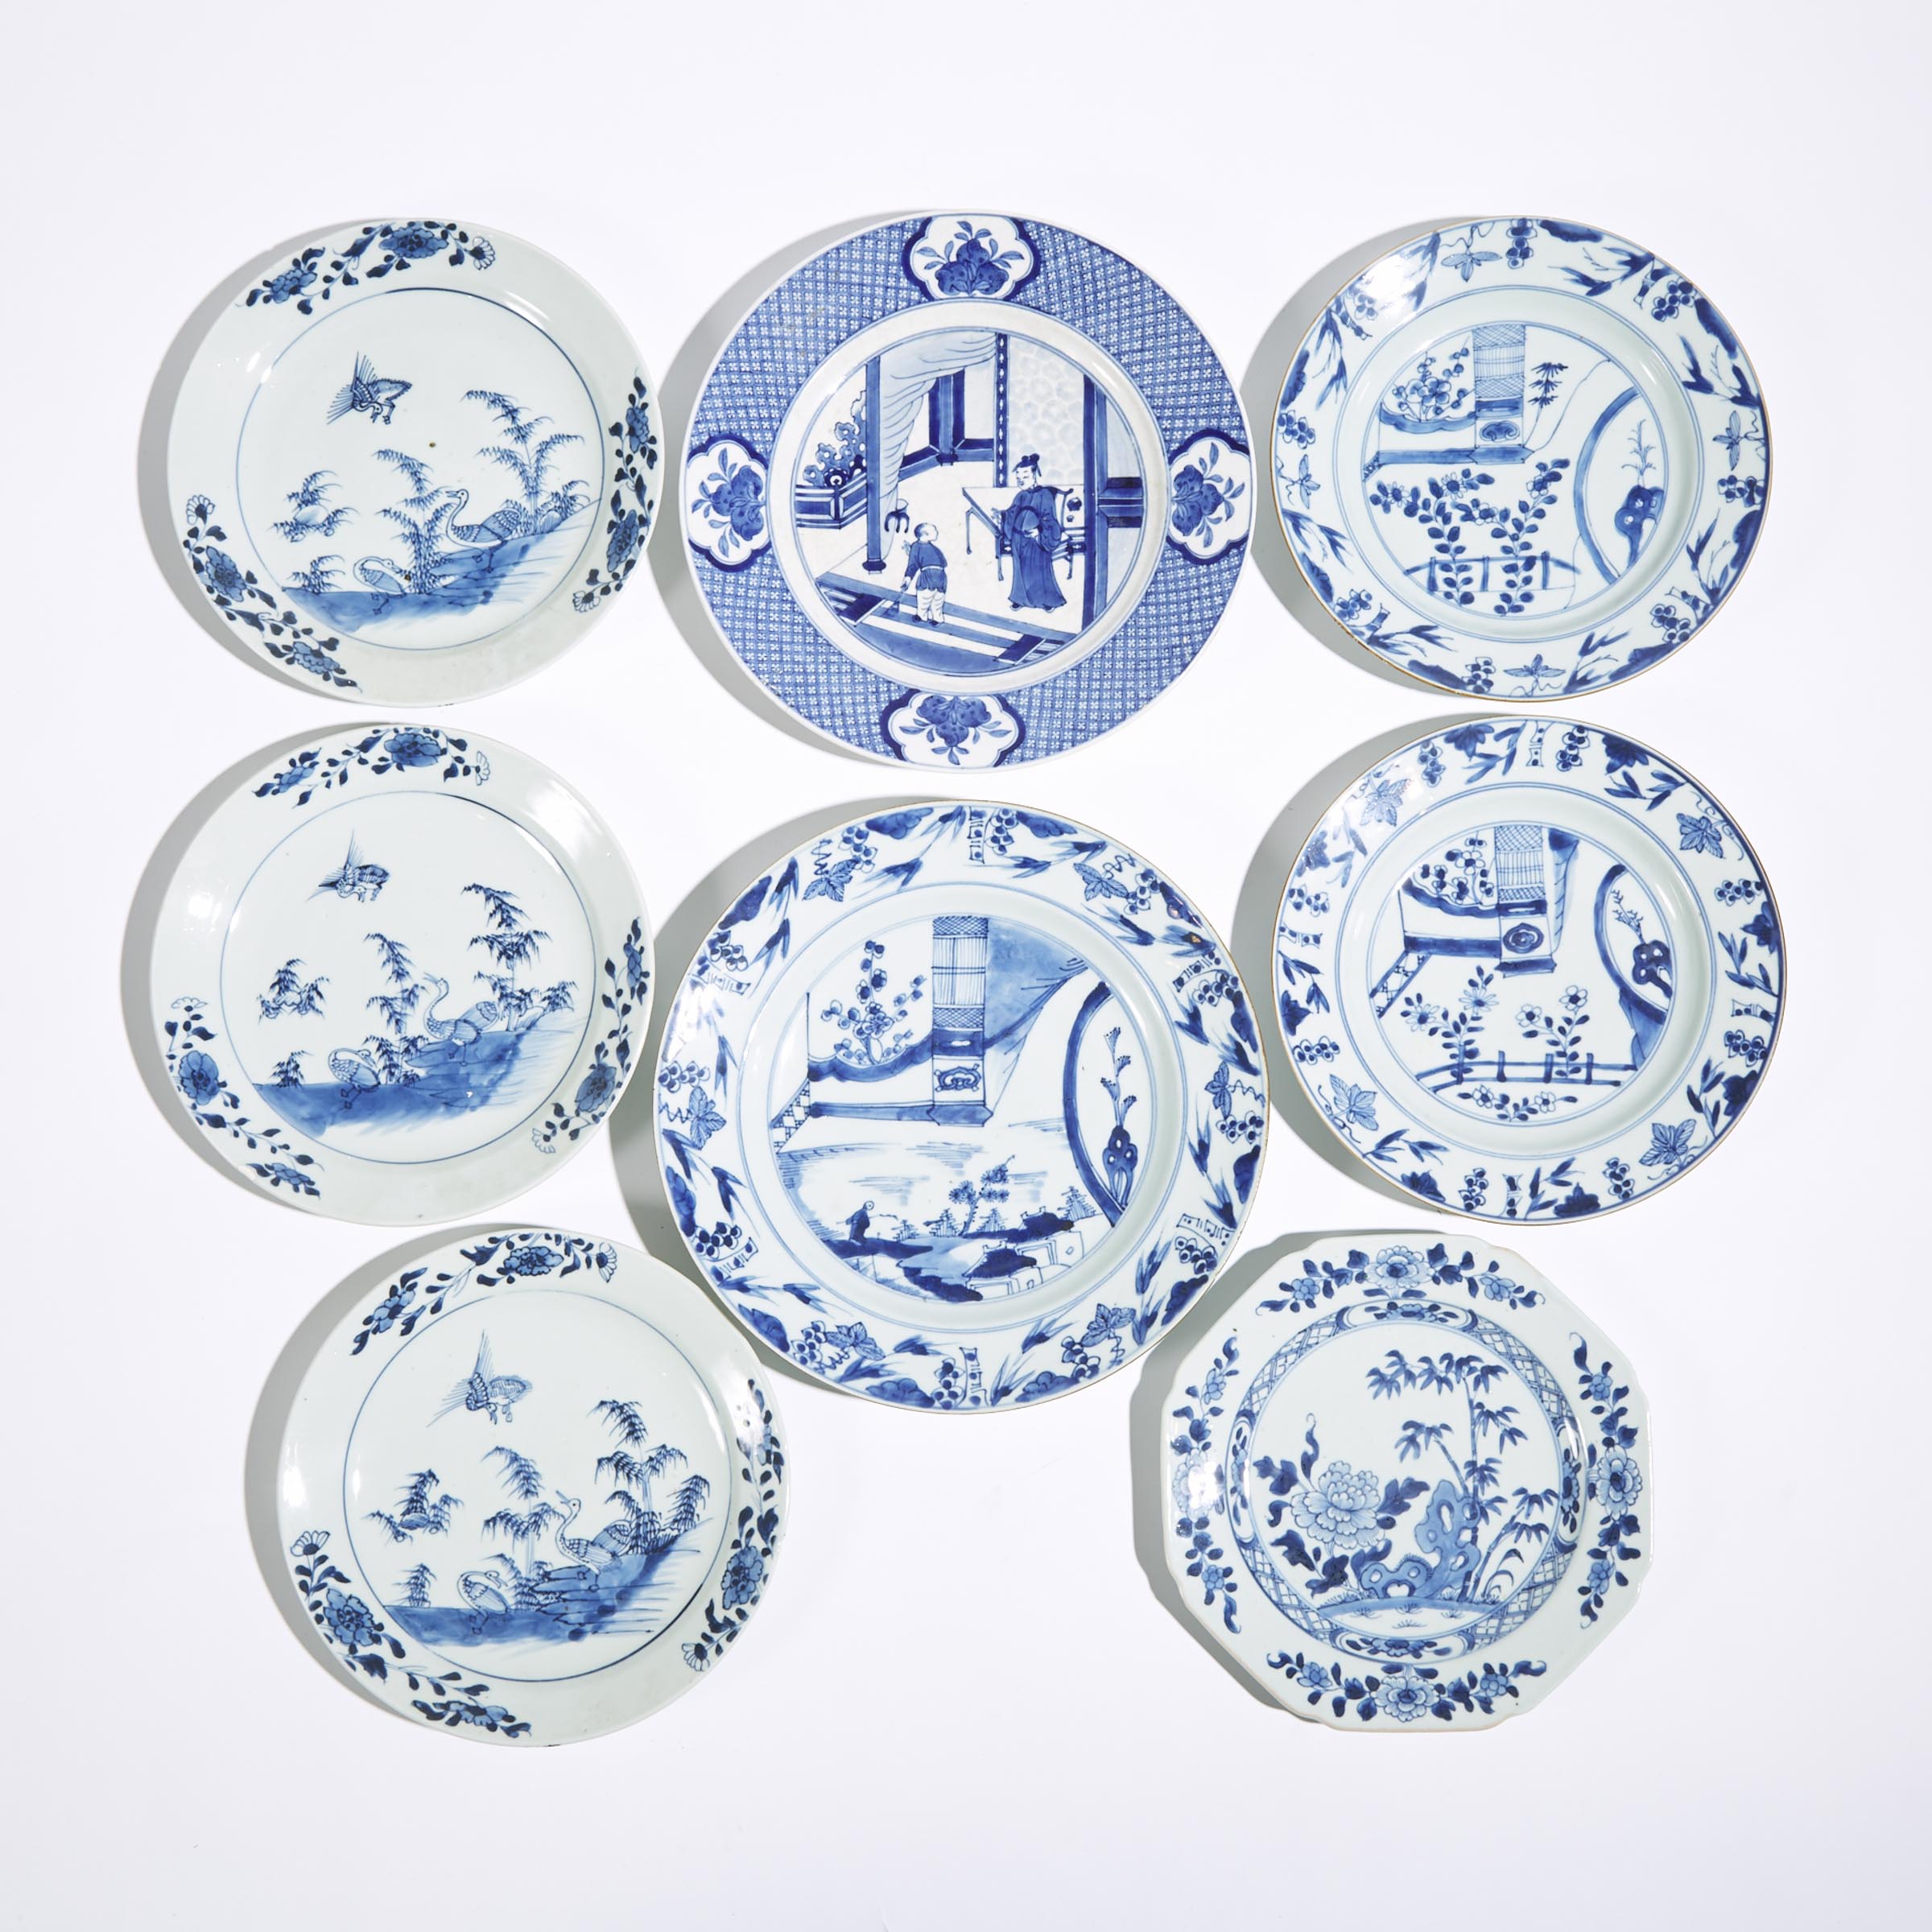 A Group of Eight Export Blue and White Dishes, 18th/19th Century